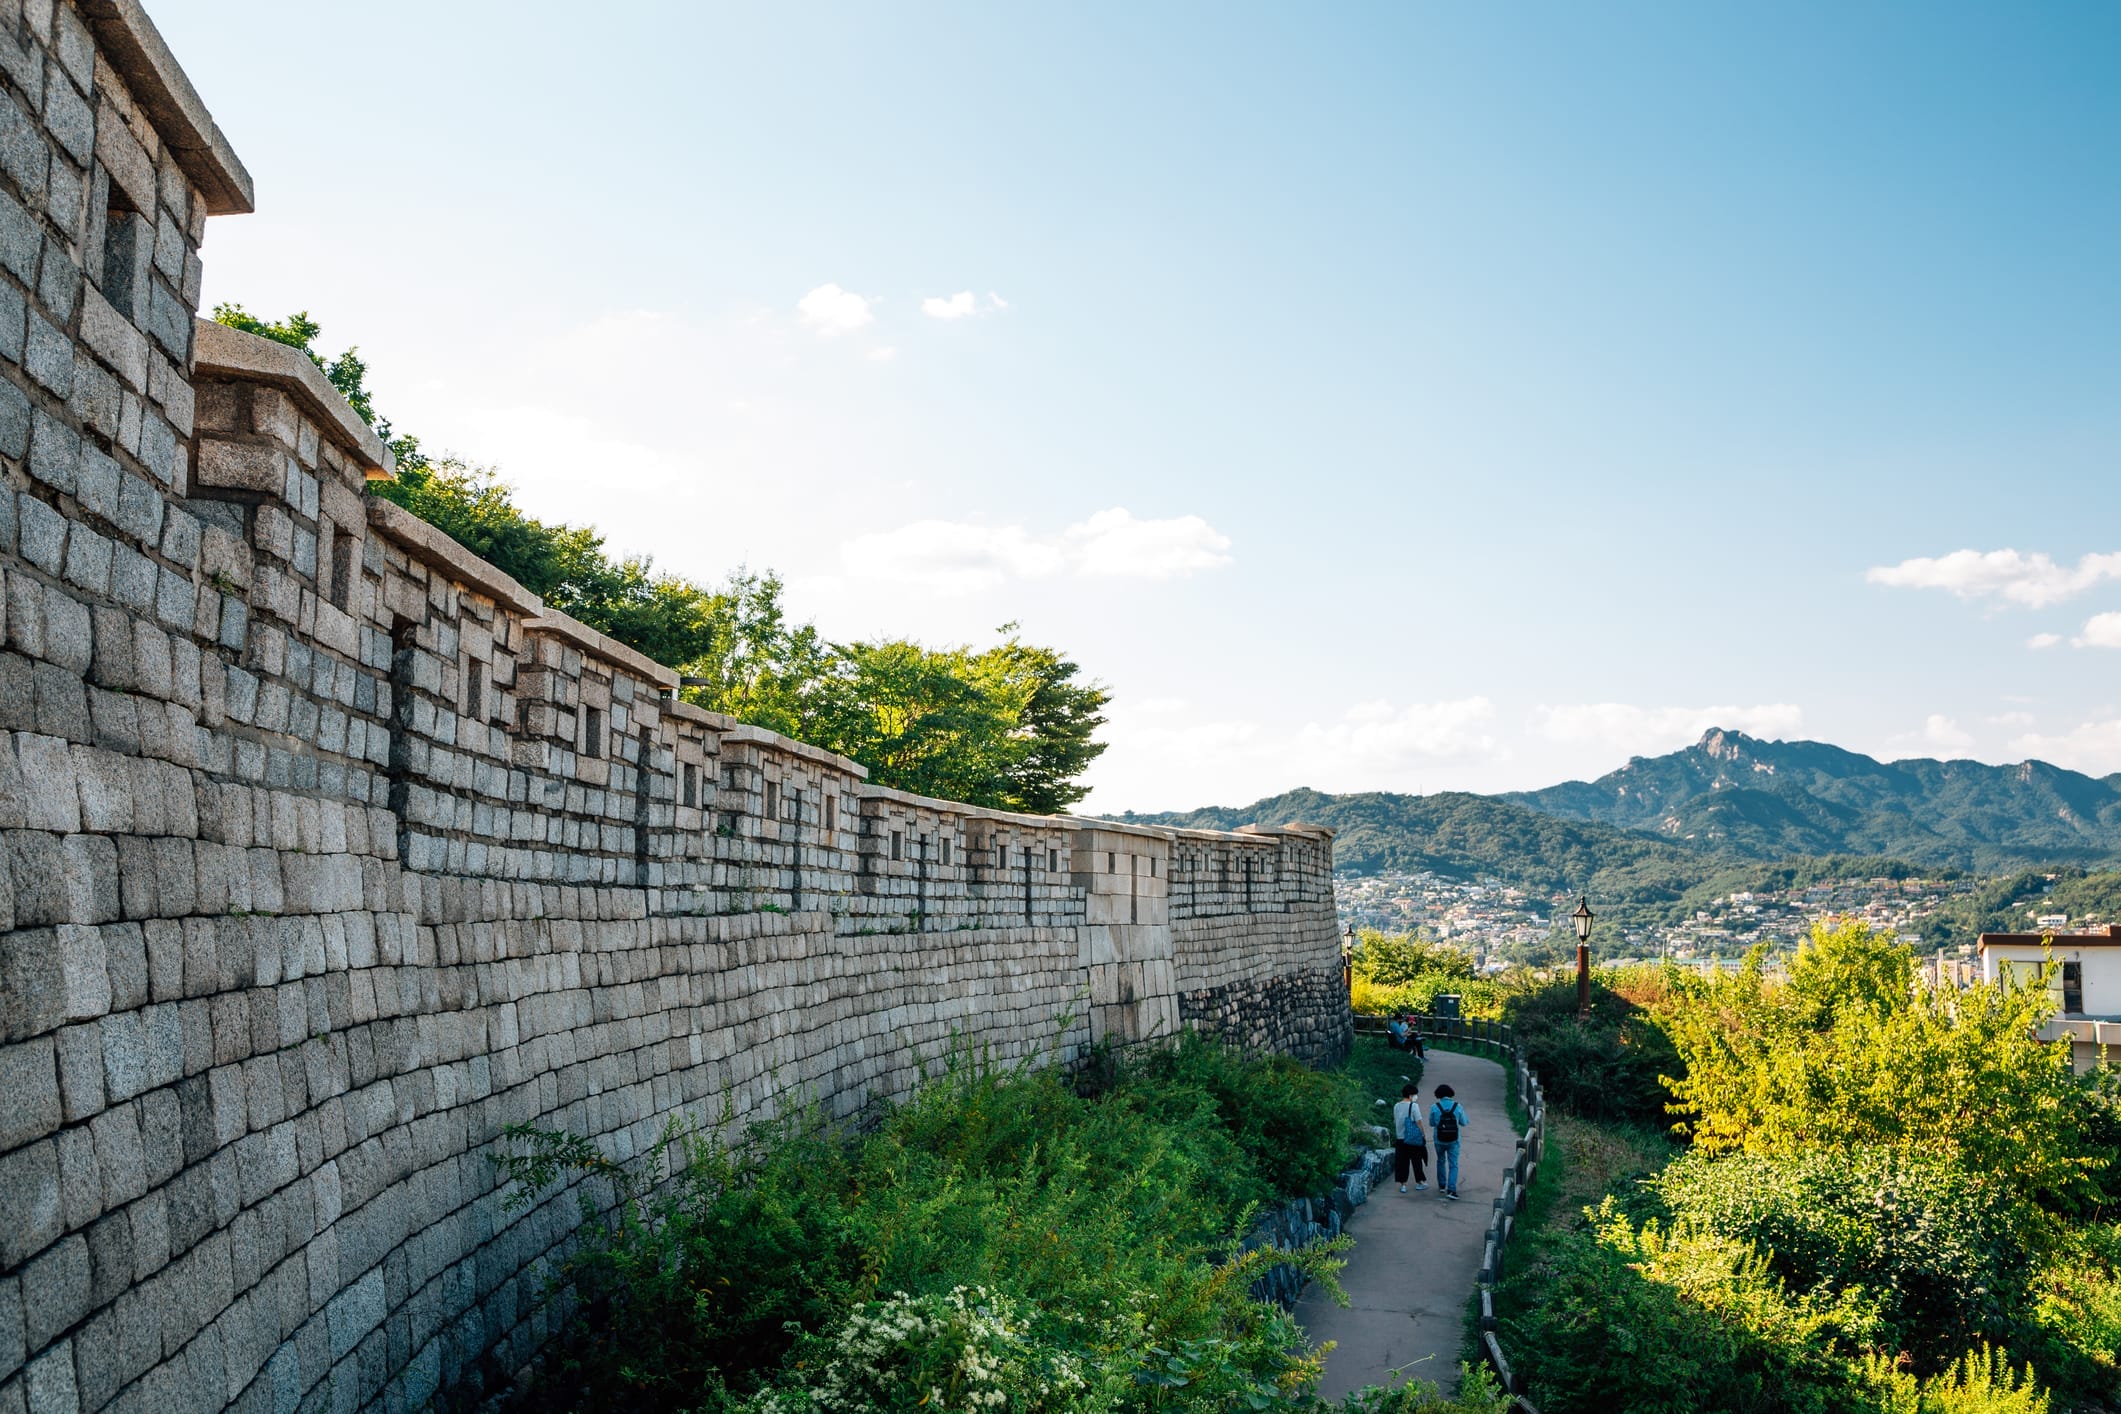 Summer Getaways in Seoul - 20+ Ways to Experience Nature in Seoul During Summer 25